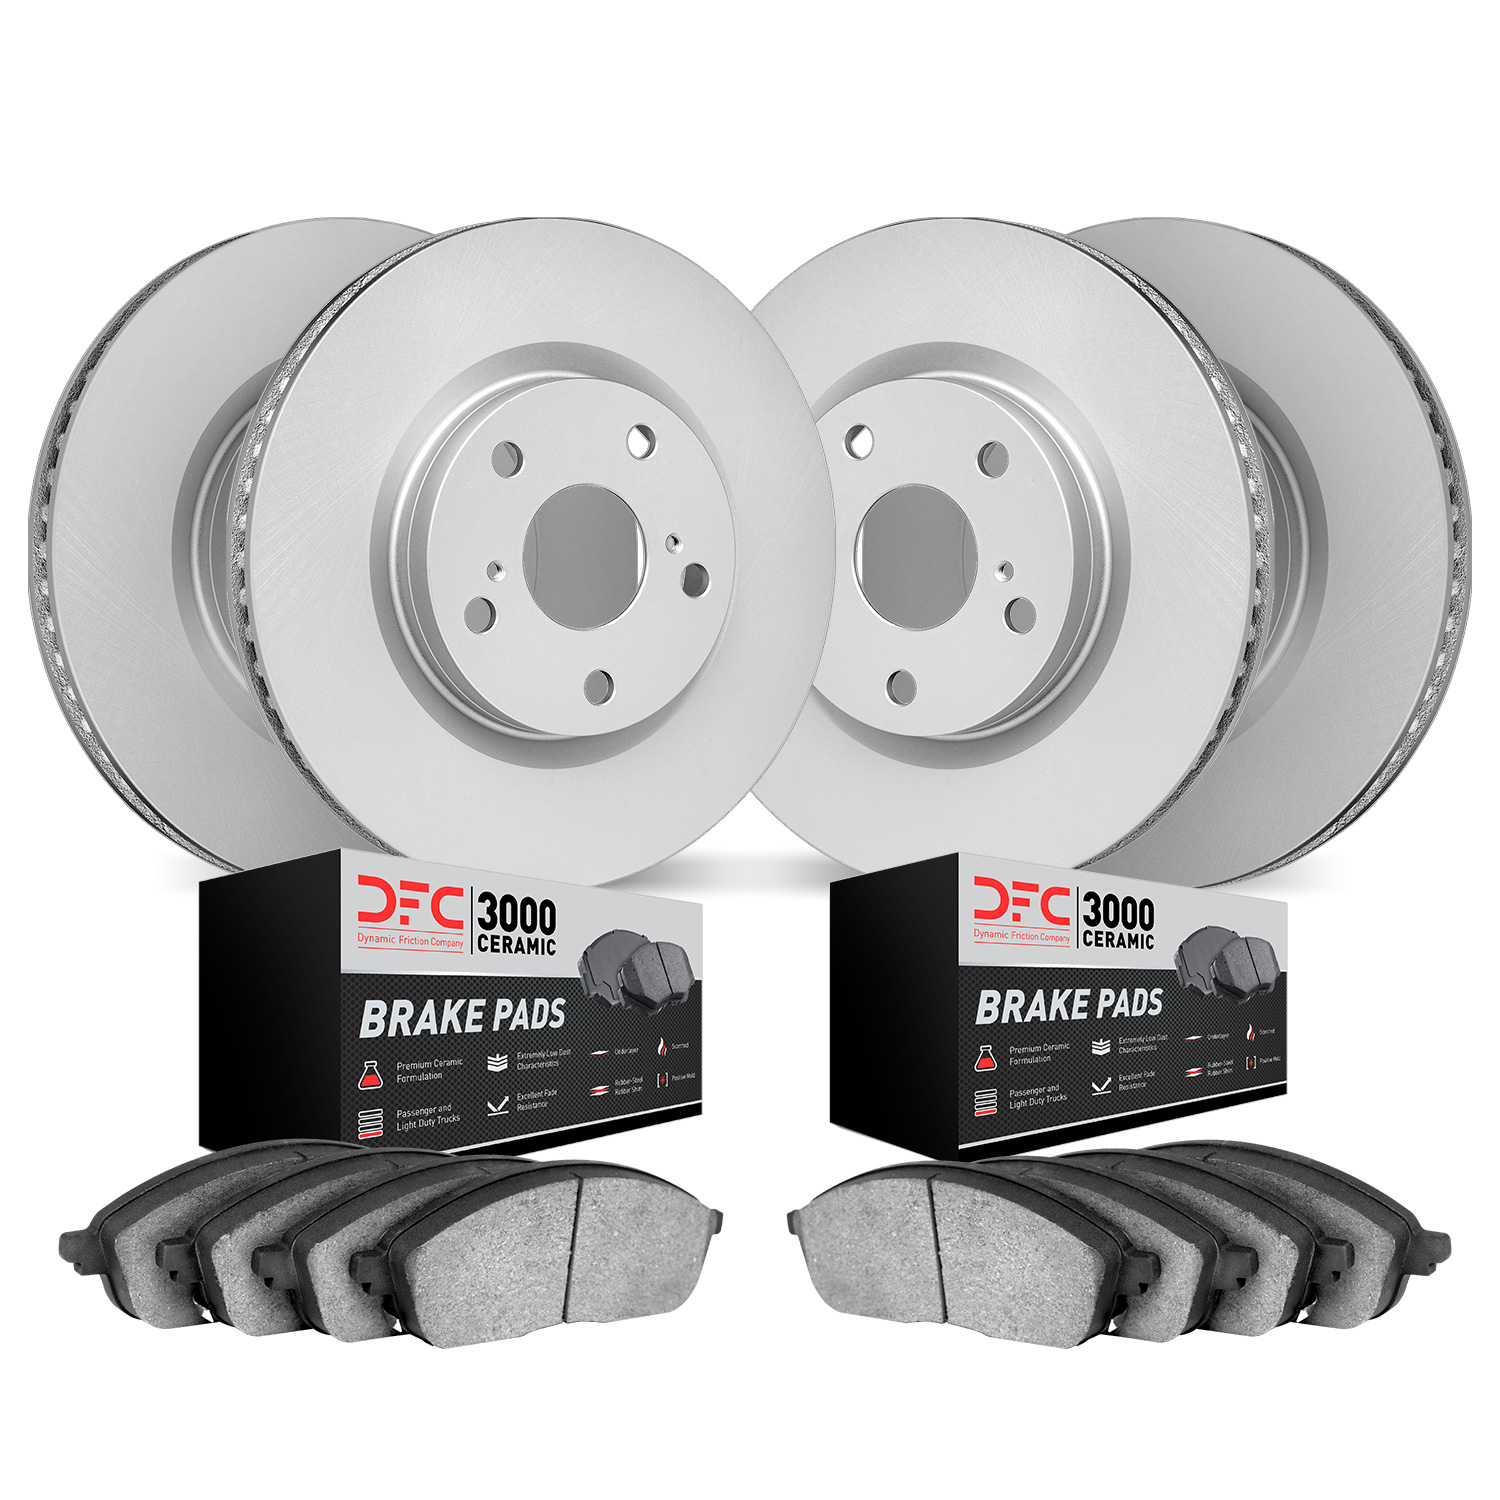 4304-76013 Geospec Brake Rotors with 3000-Series Ceramic Brake Pads Kit, 1998-2007 Lexus/Toyota/Scion, Position: Front and Rear